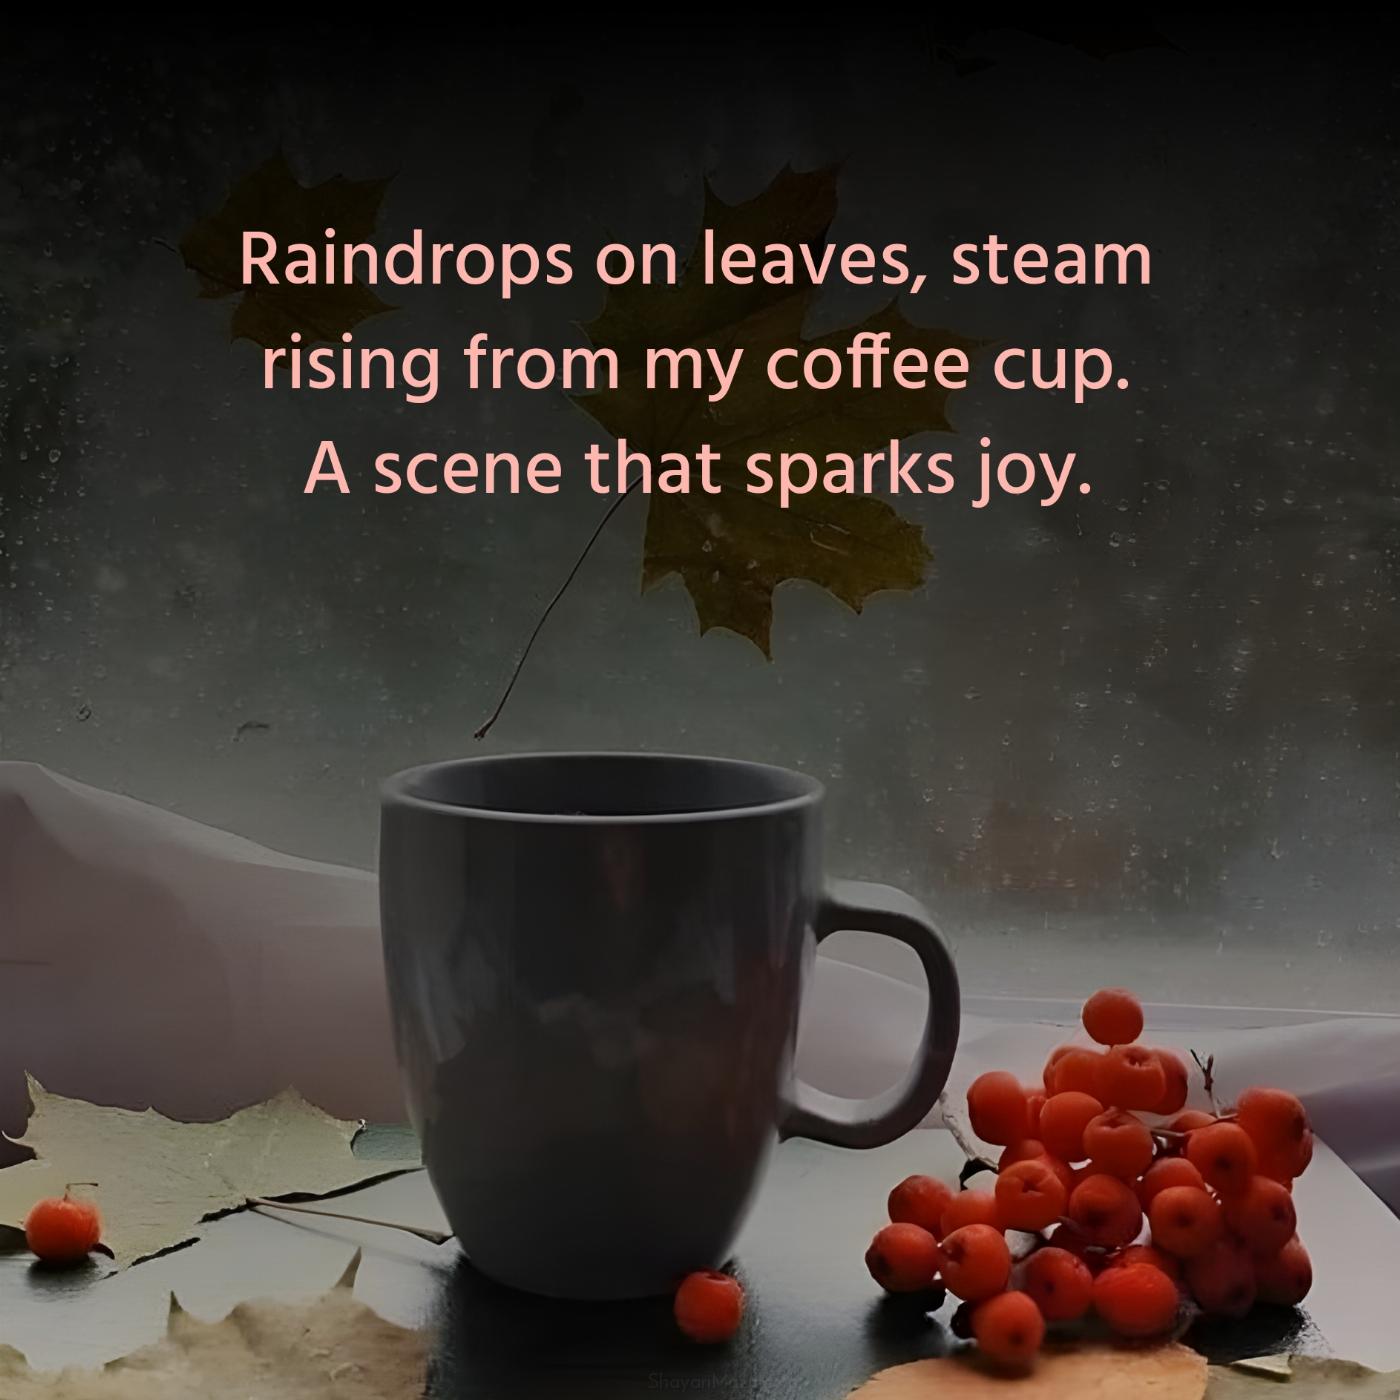 Raindrops on leaves steam rising from my coffee cup